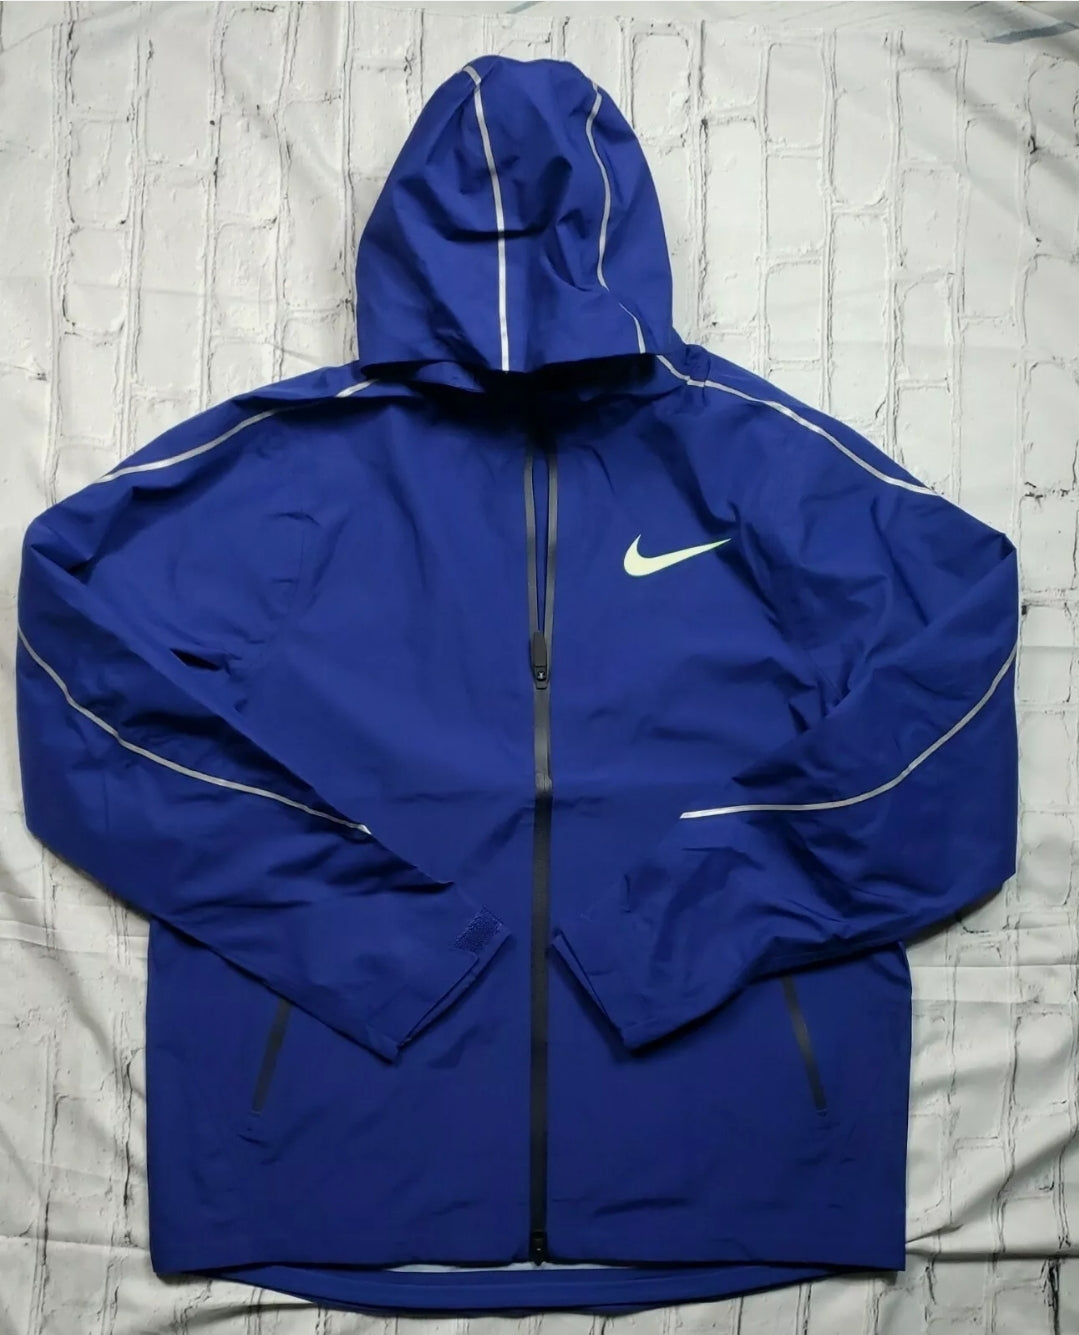 Nike Pro Elite 2019 Storm Jacket new men Track and Field rare